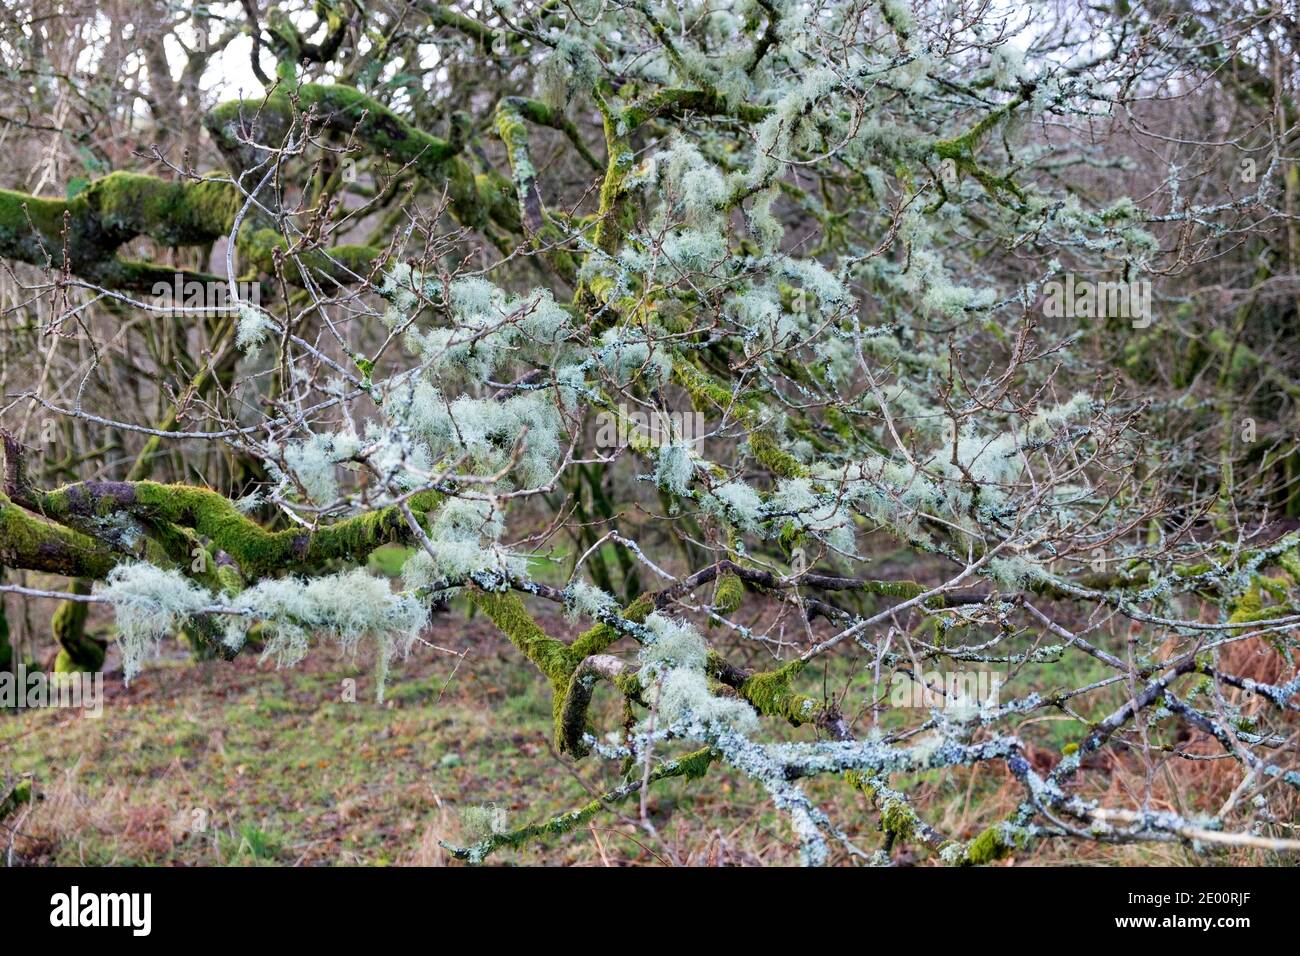 Ramalina farinacea fruticose lichen and moss growing on twigs branches of an oak tree in woodland in winter Carmarthenshire Wales UK 2020 KATHY DEWITT Stock Photo